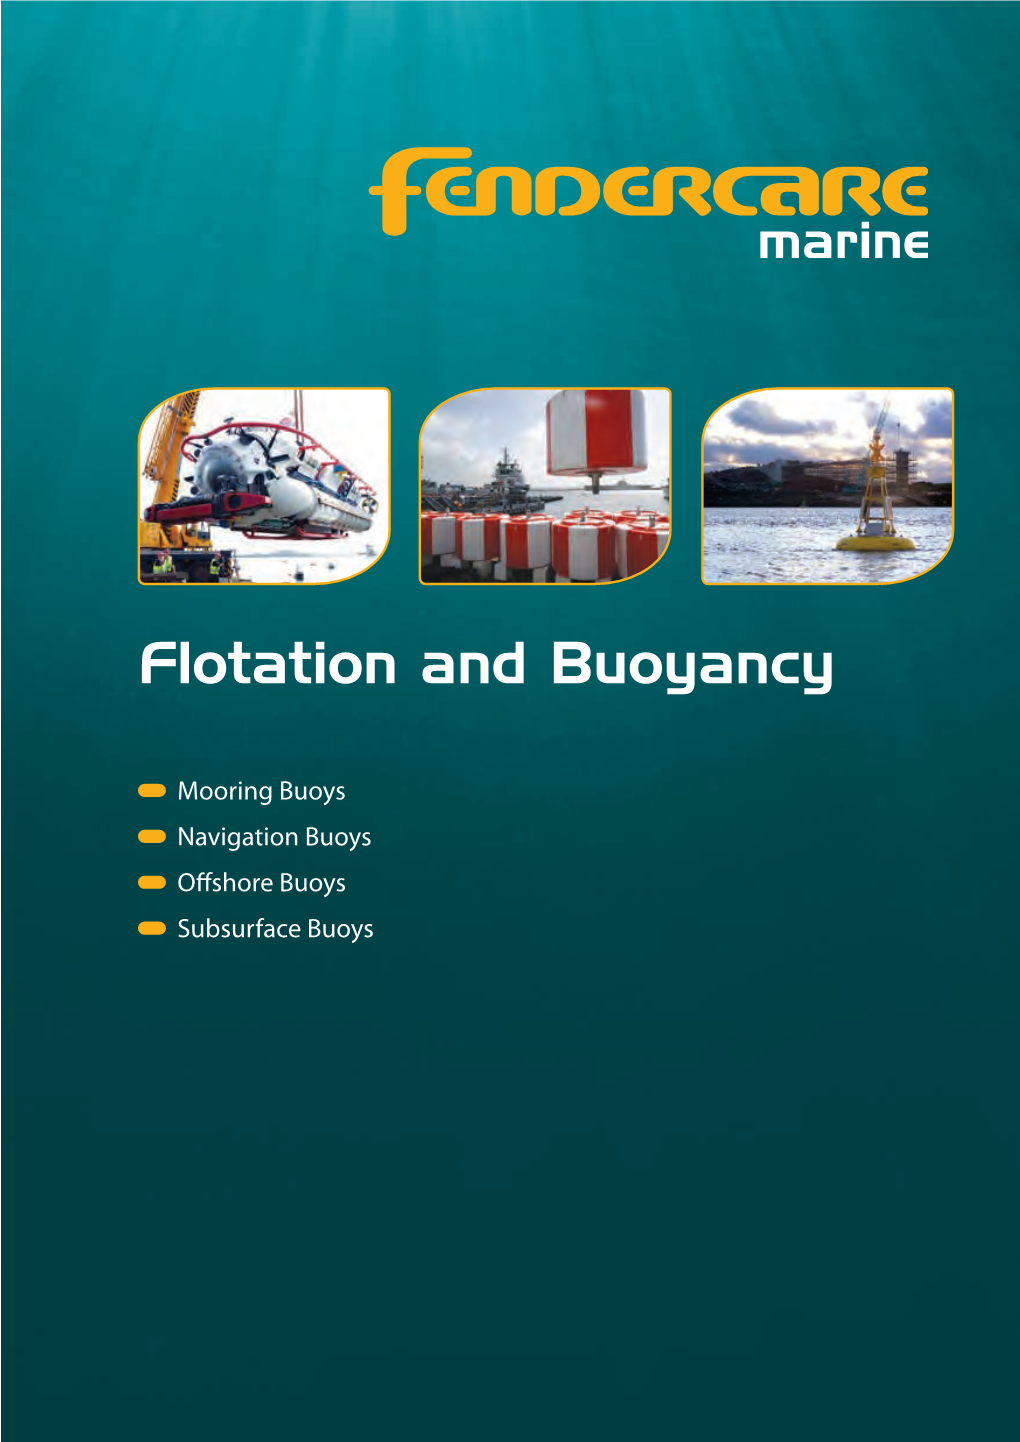 Download the Flotation and Buoyancy Brochure